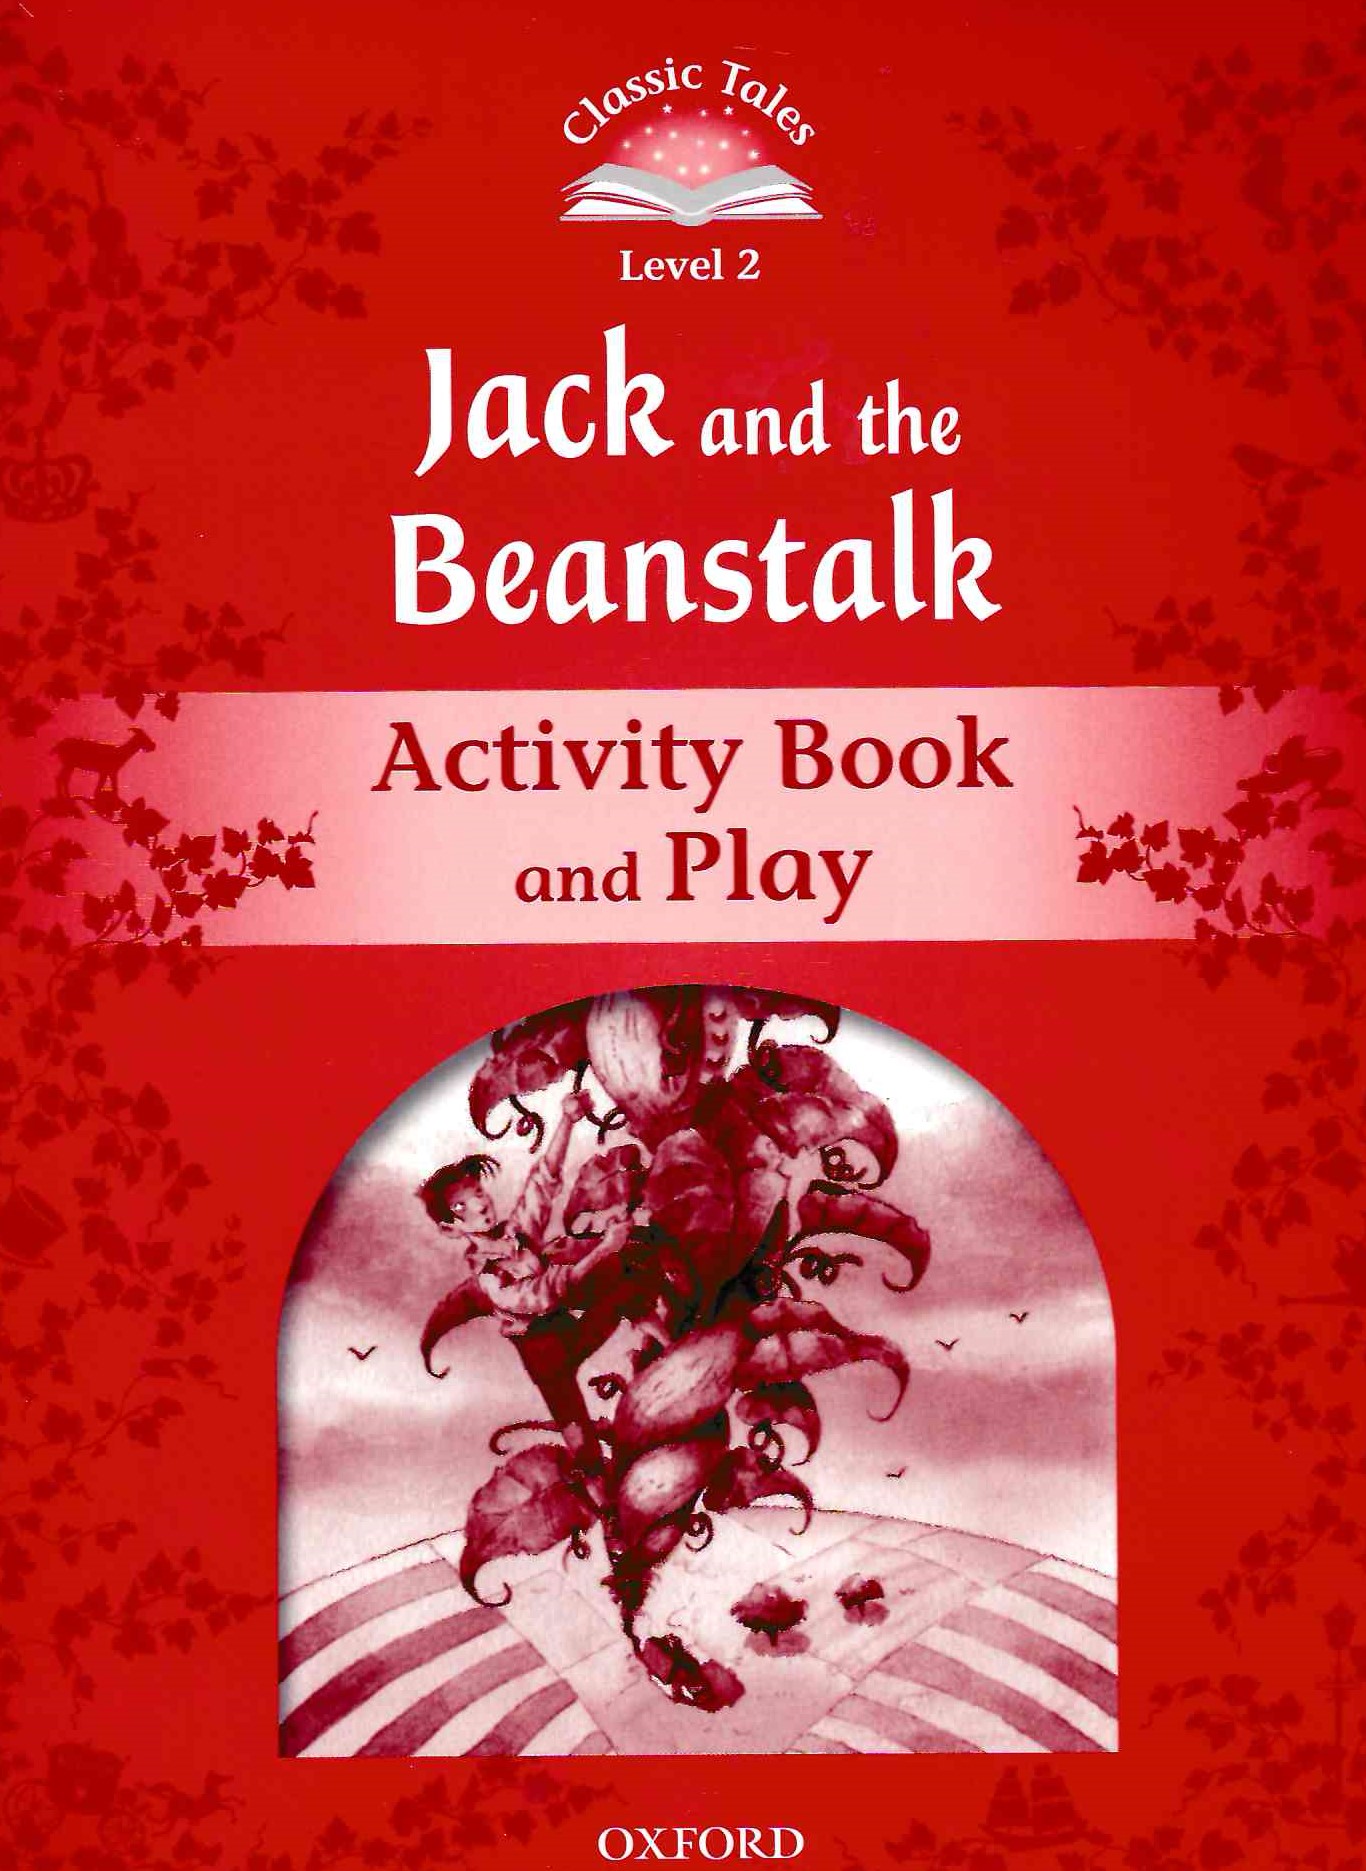 Jack and the Beanstalk Activity Book and Play